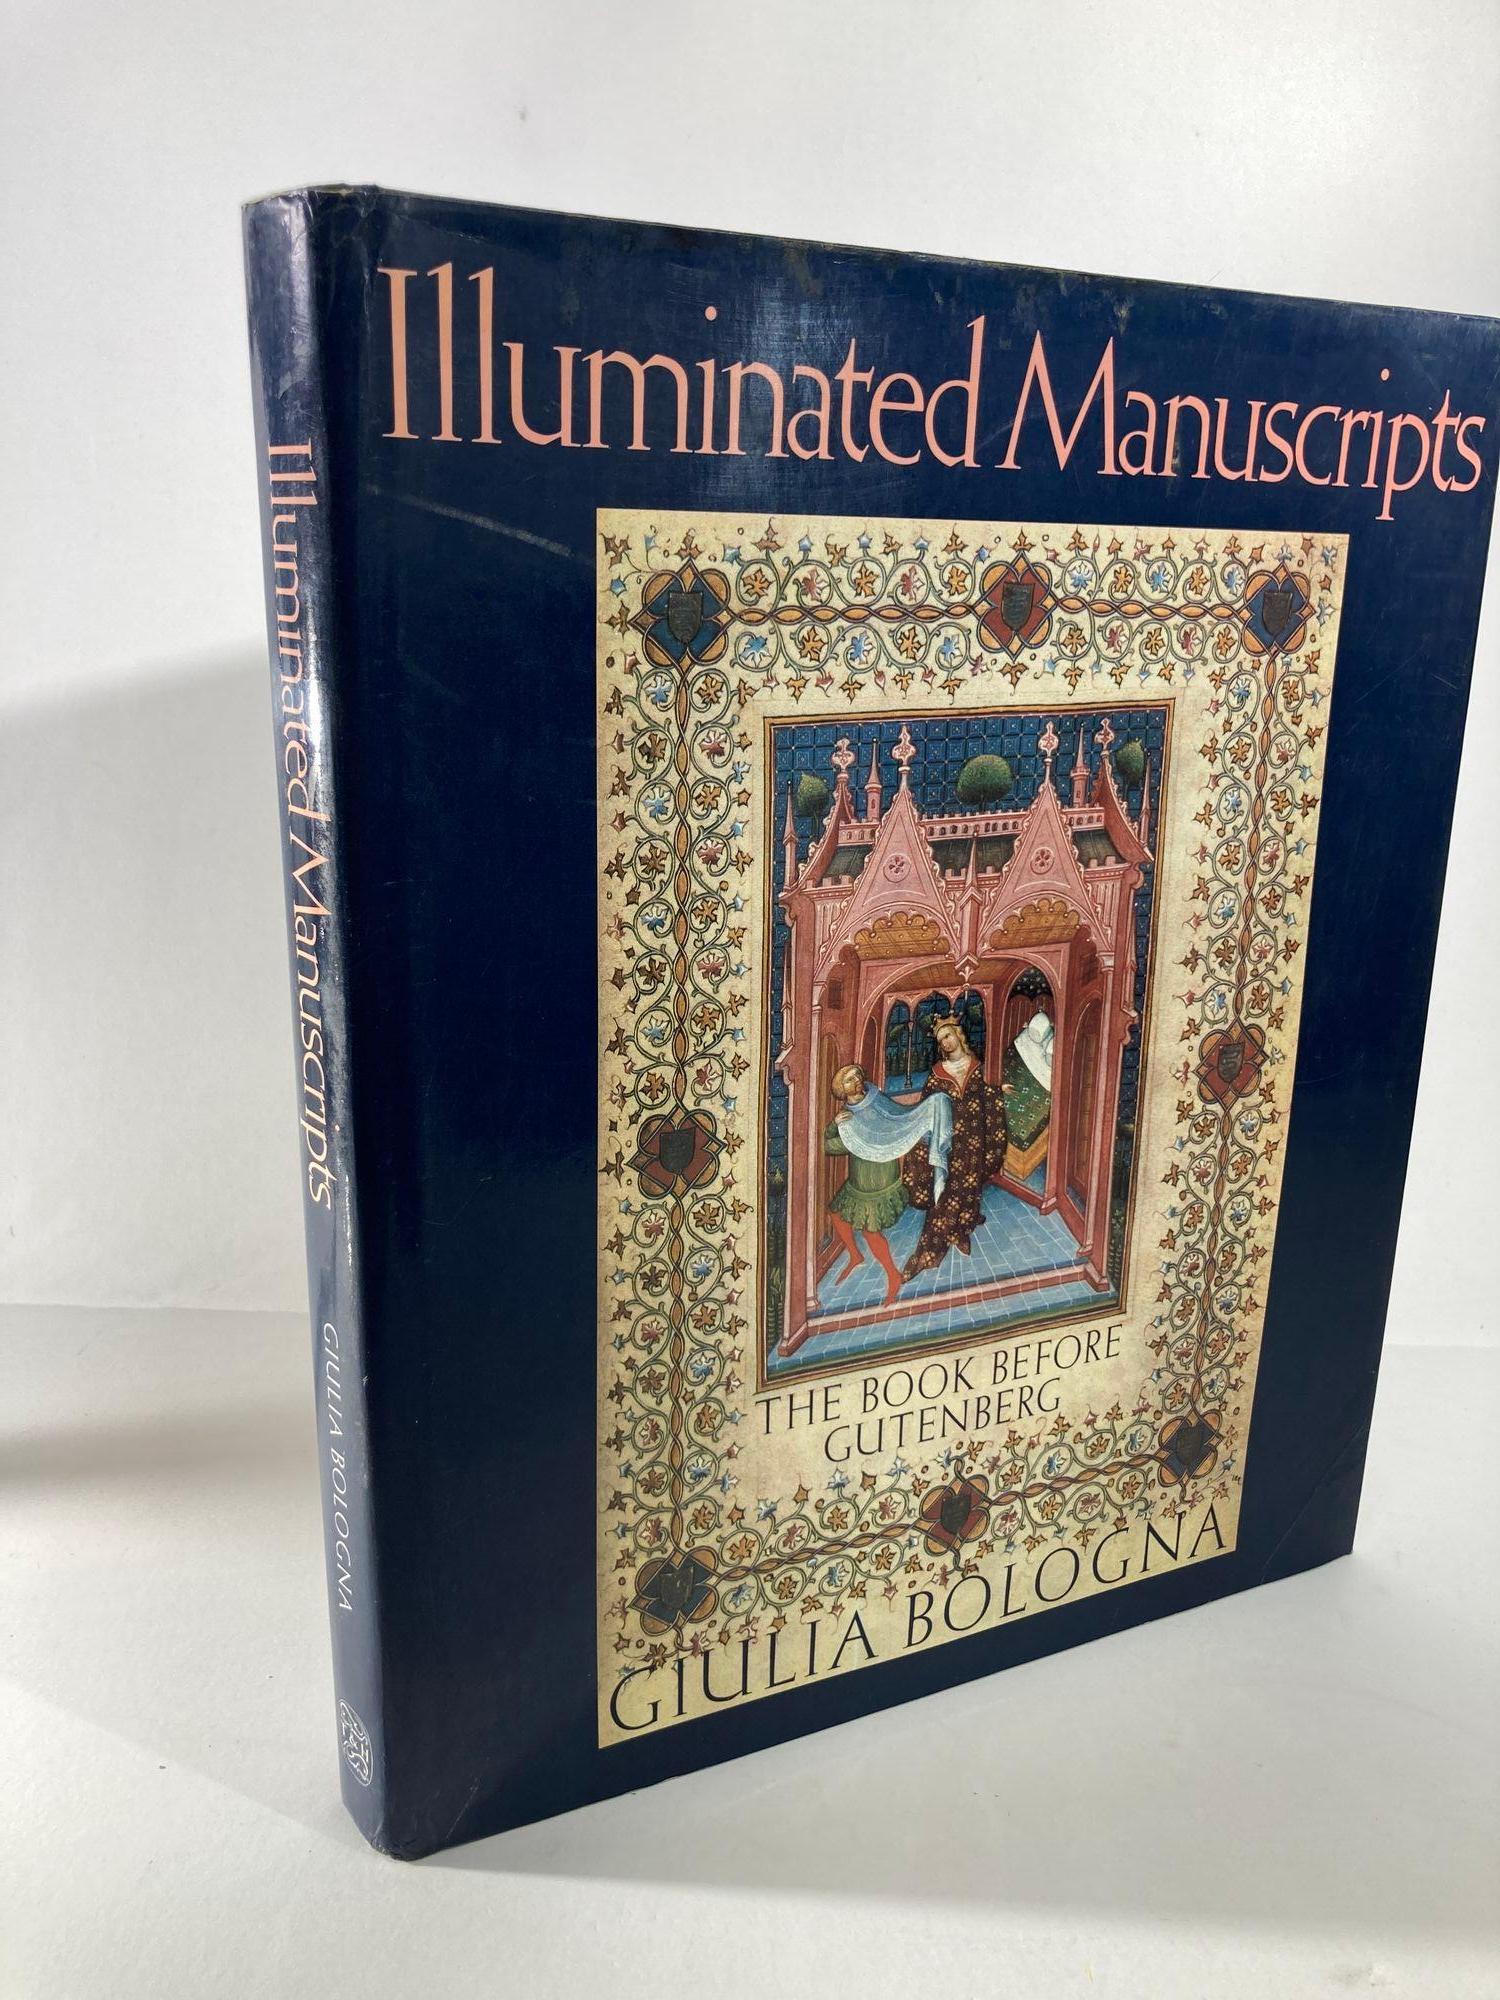 Illuminated manuscripts: the book before Gutenberg Giulia Bologna. 1st Edition 1988.
Presents more than one thousand years of late Roman, medieval, and Renaissance manuscripts, along with an accompanying history of paper and writing implements, the